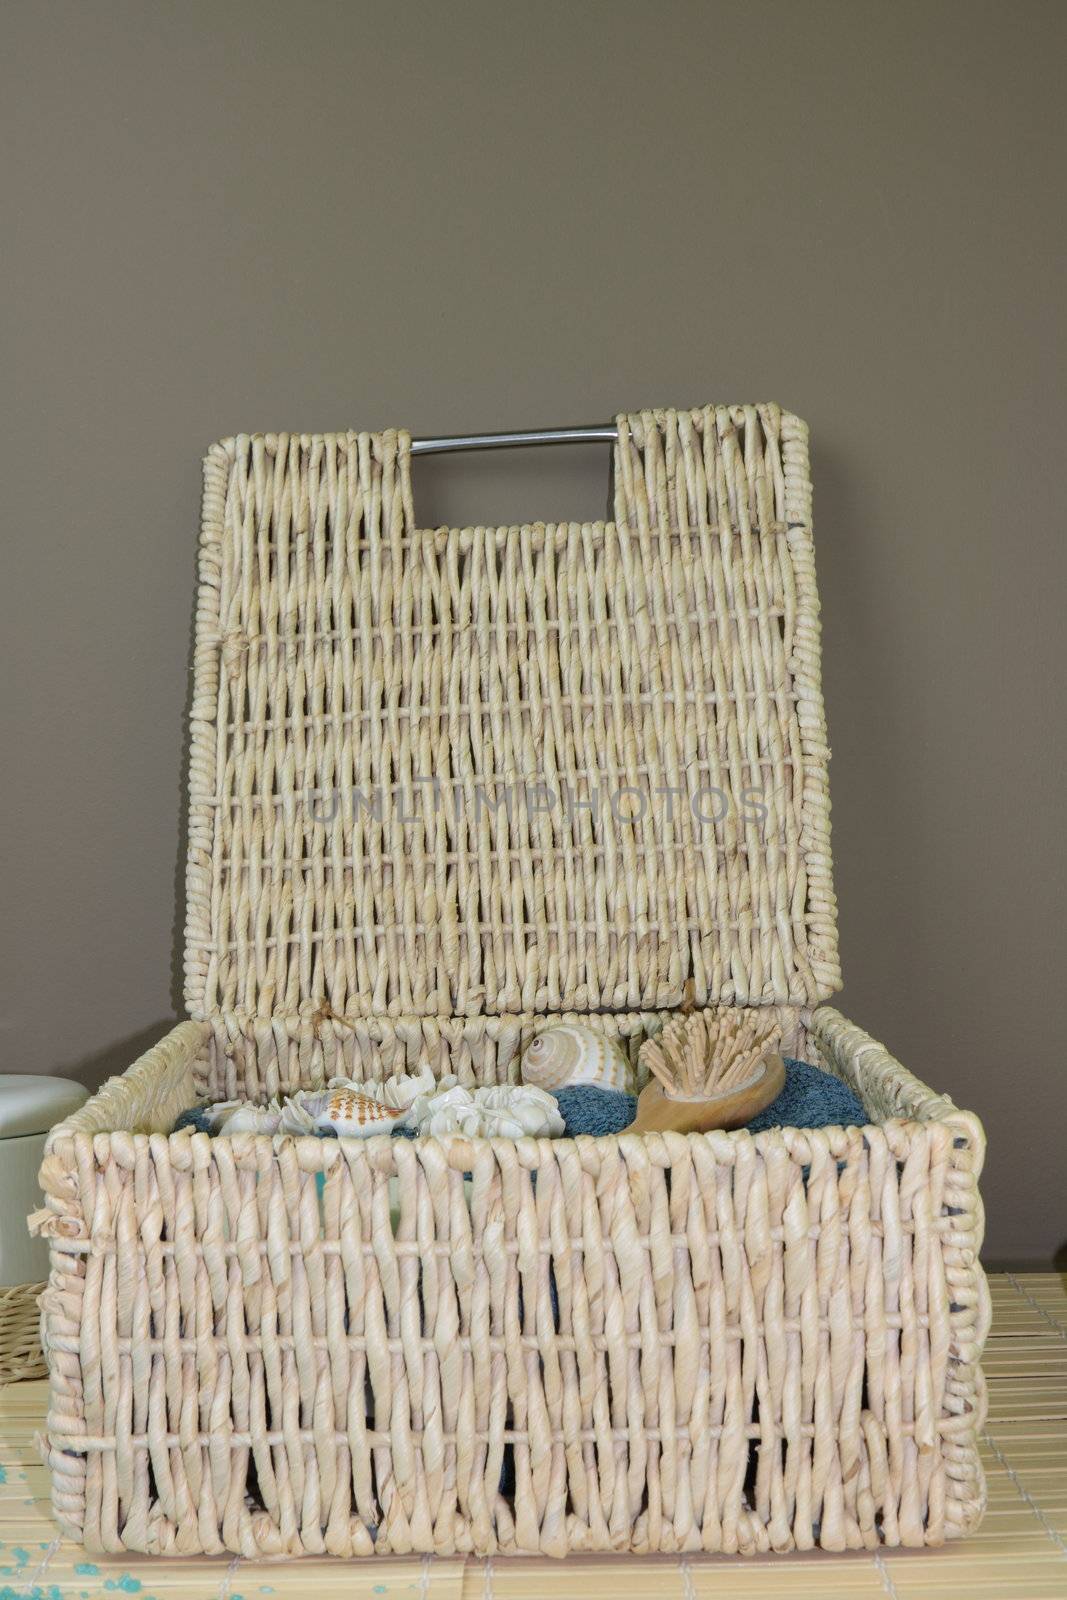 Spa basket by BDS